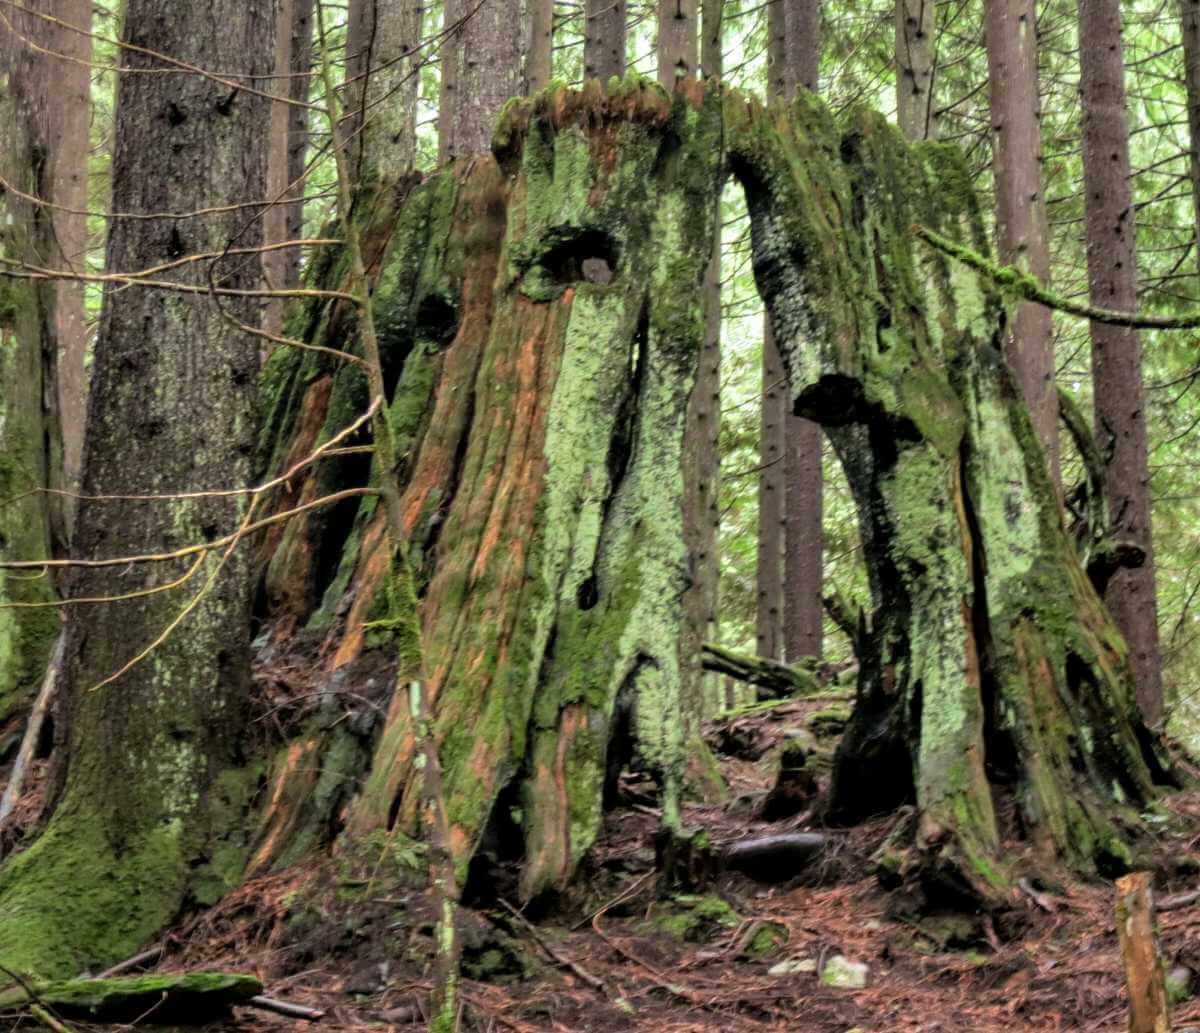 It feels like looking at the remains of an Ent (Lord of the Rings)